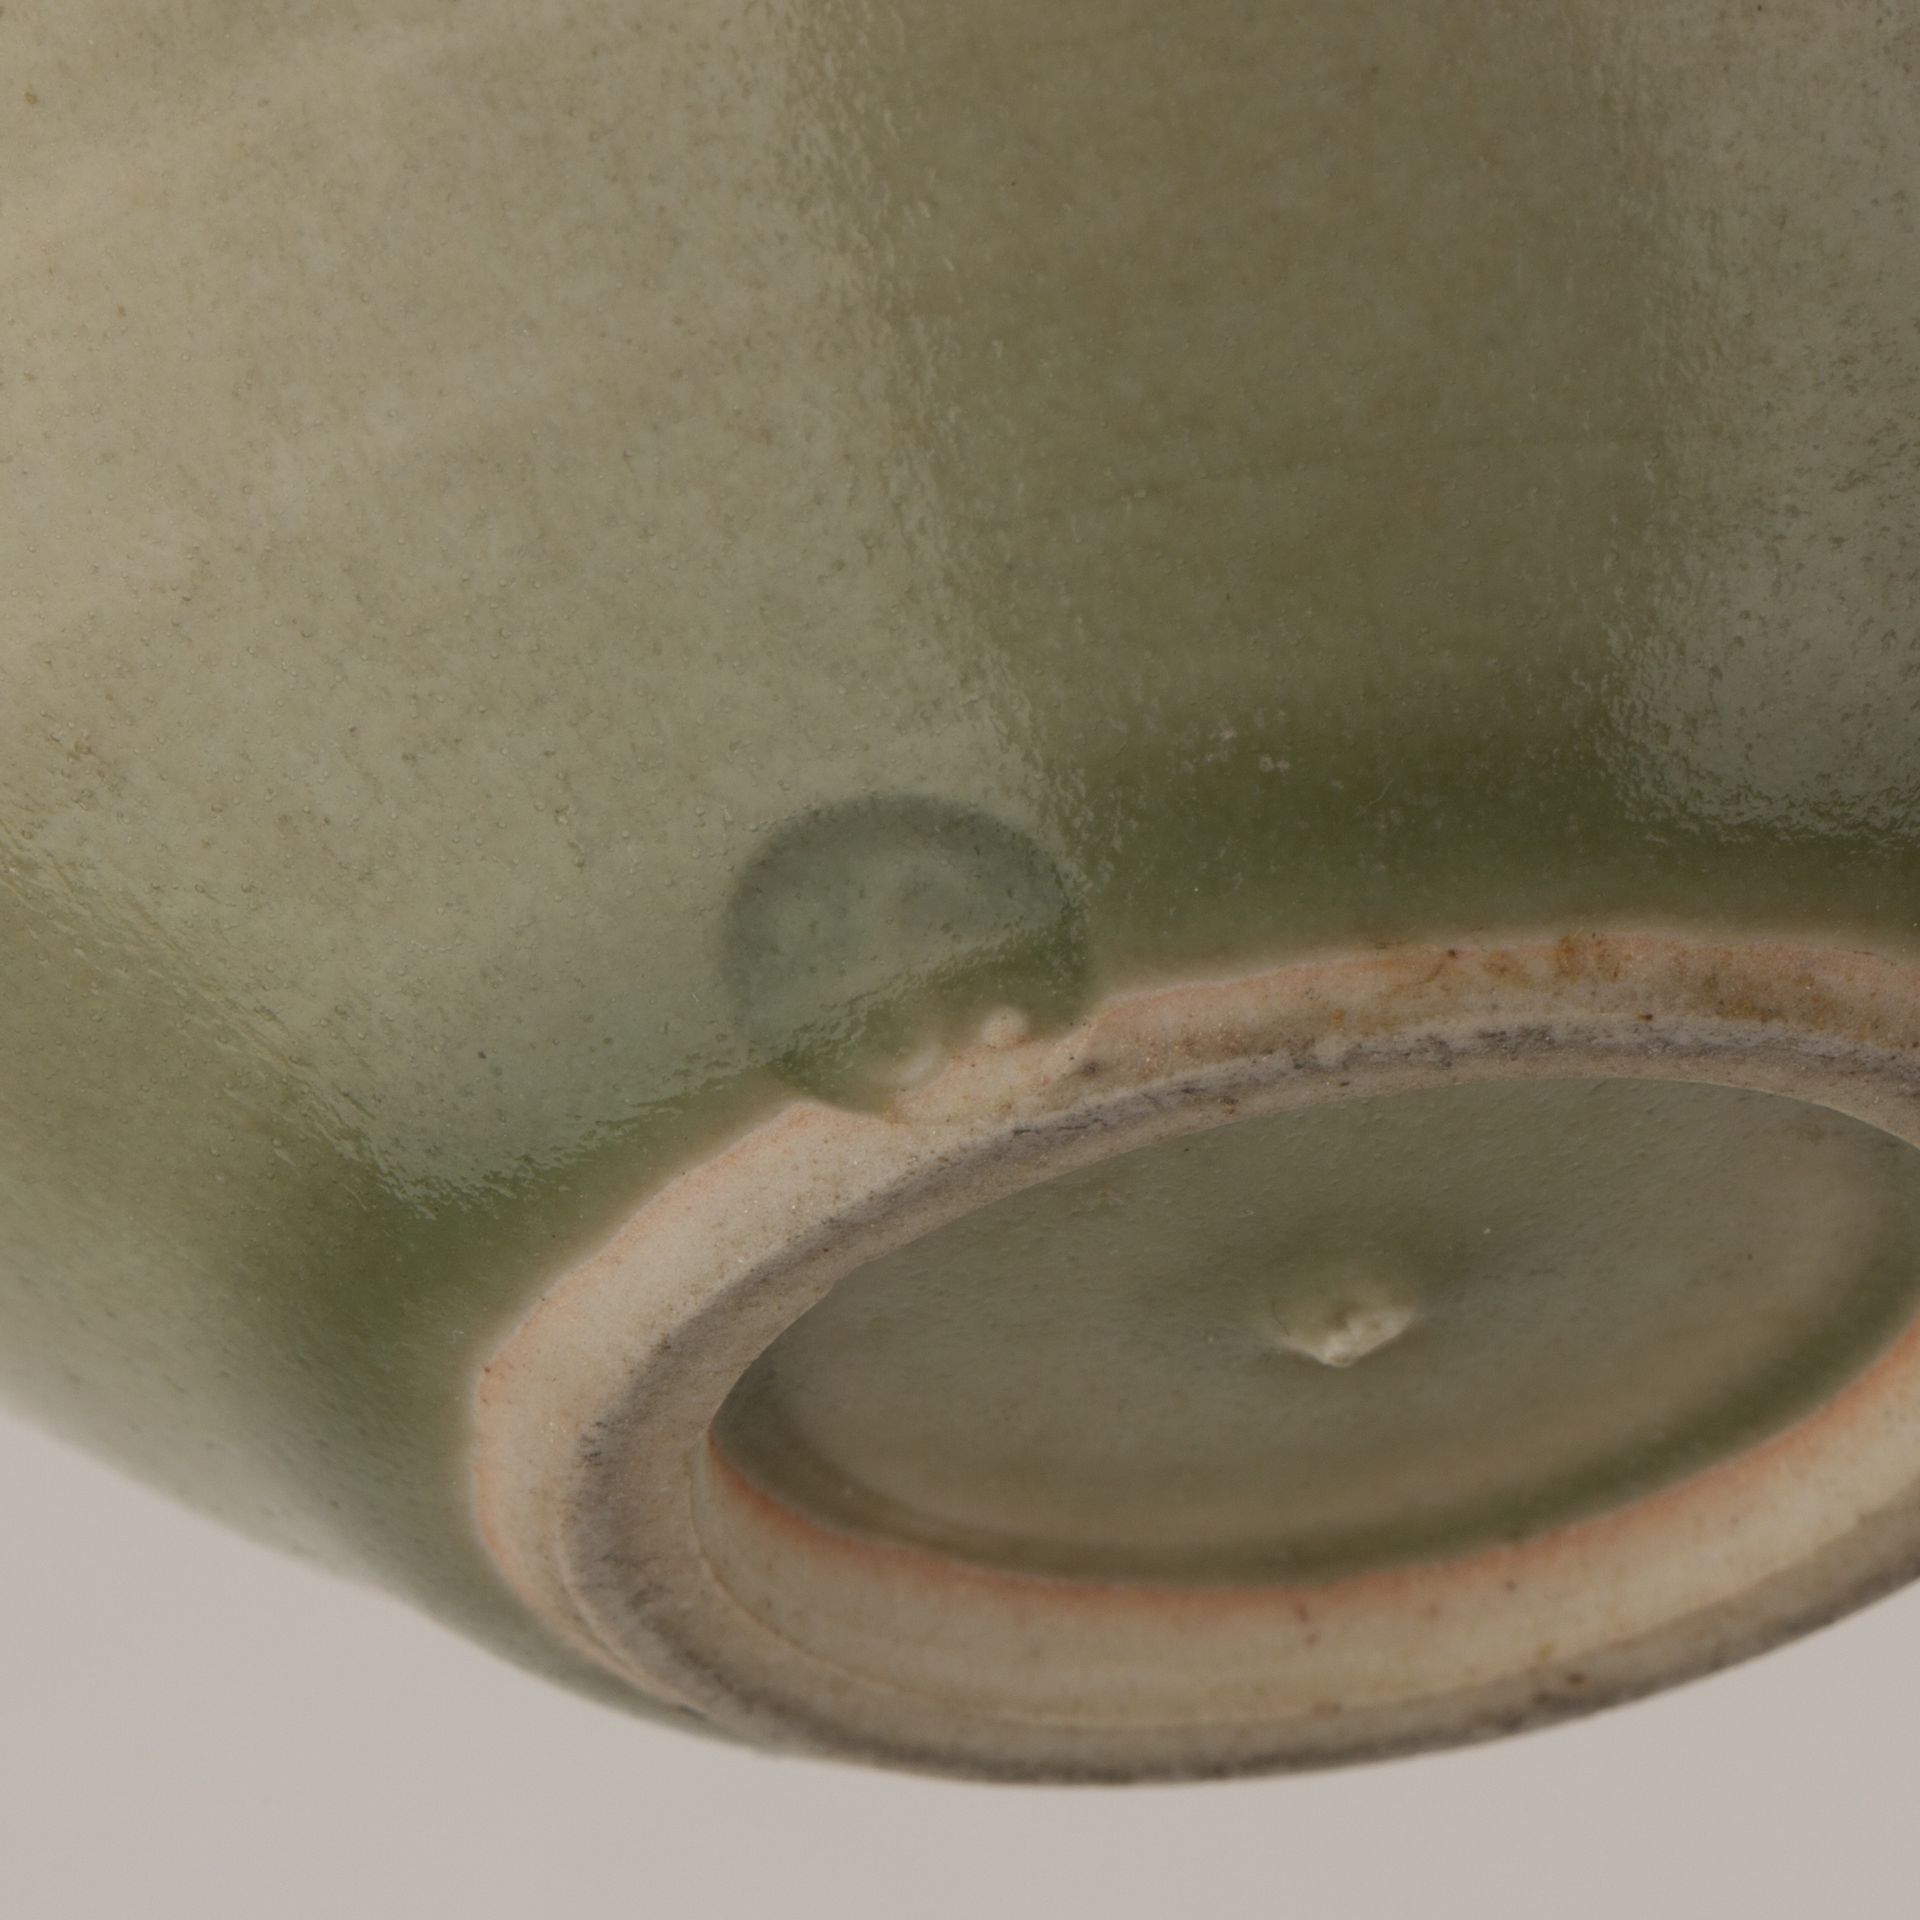 Attributed to David Leach (1911-2005) at Leach Pottery celadon glazed preserve pot, decorated with - Image 6 of 7